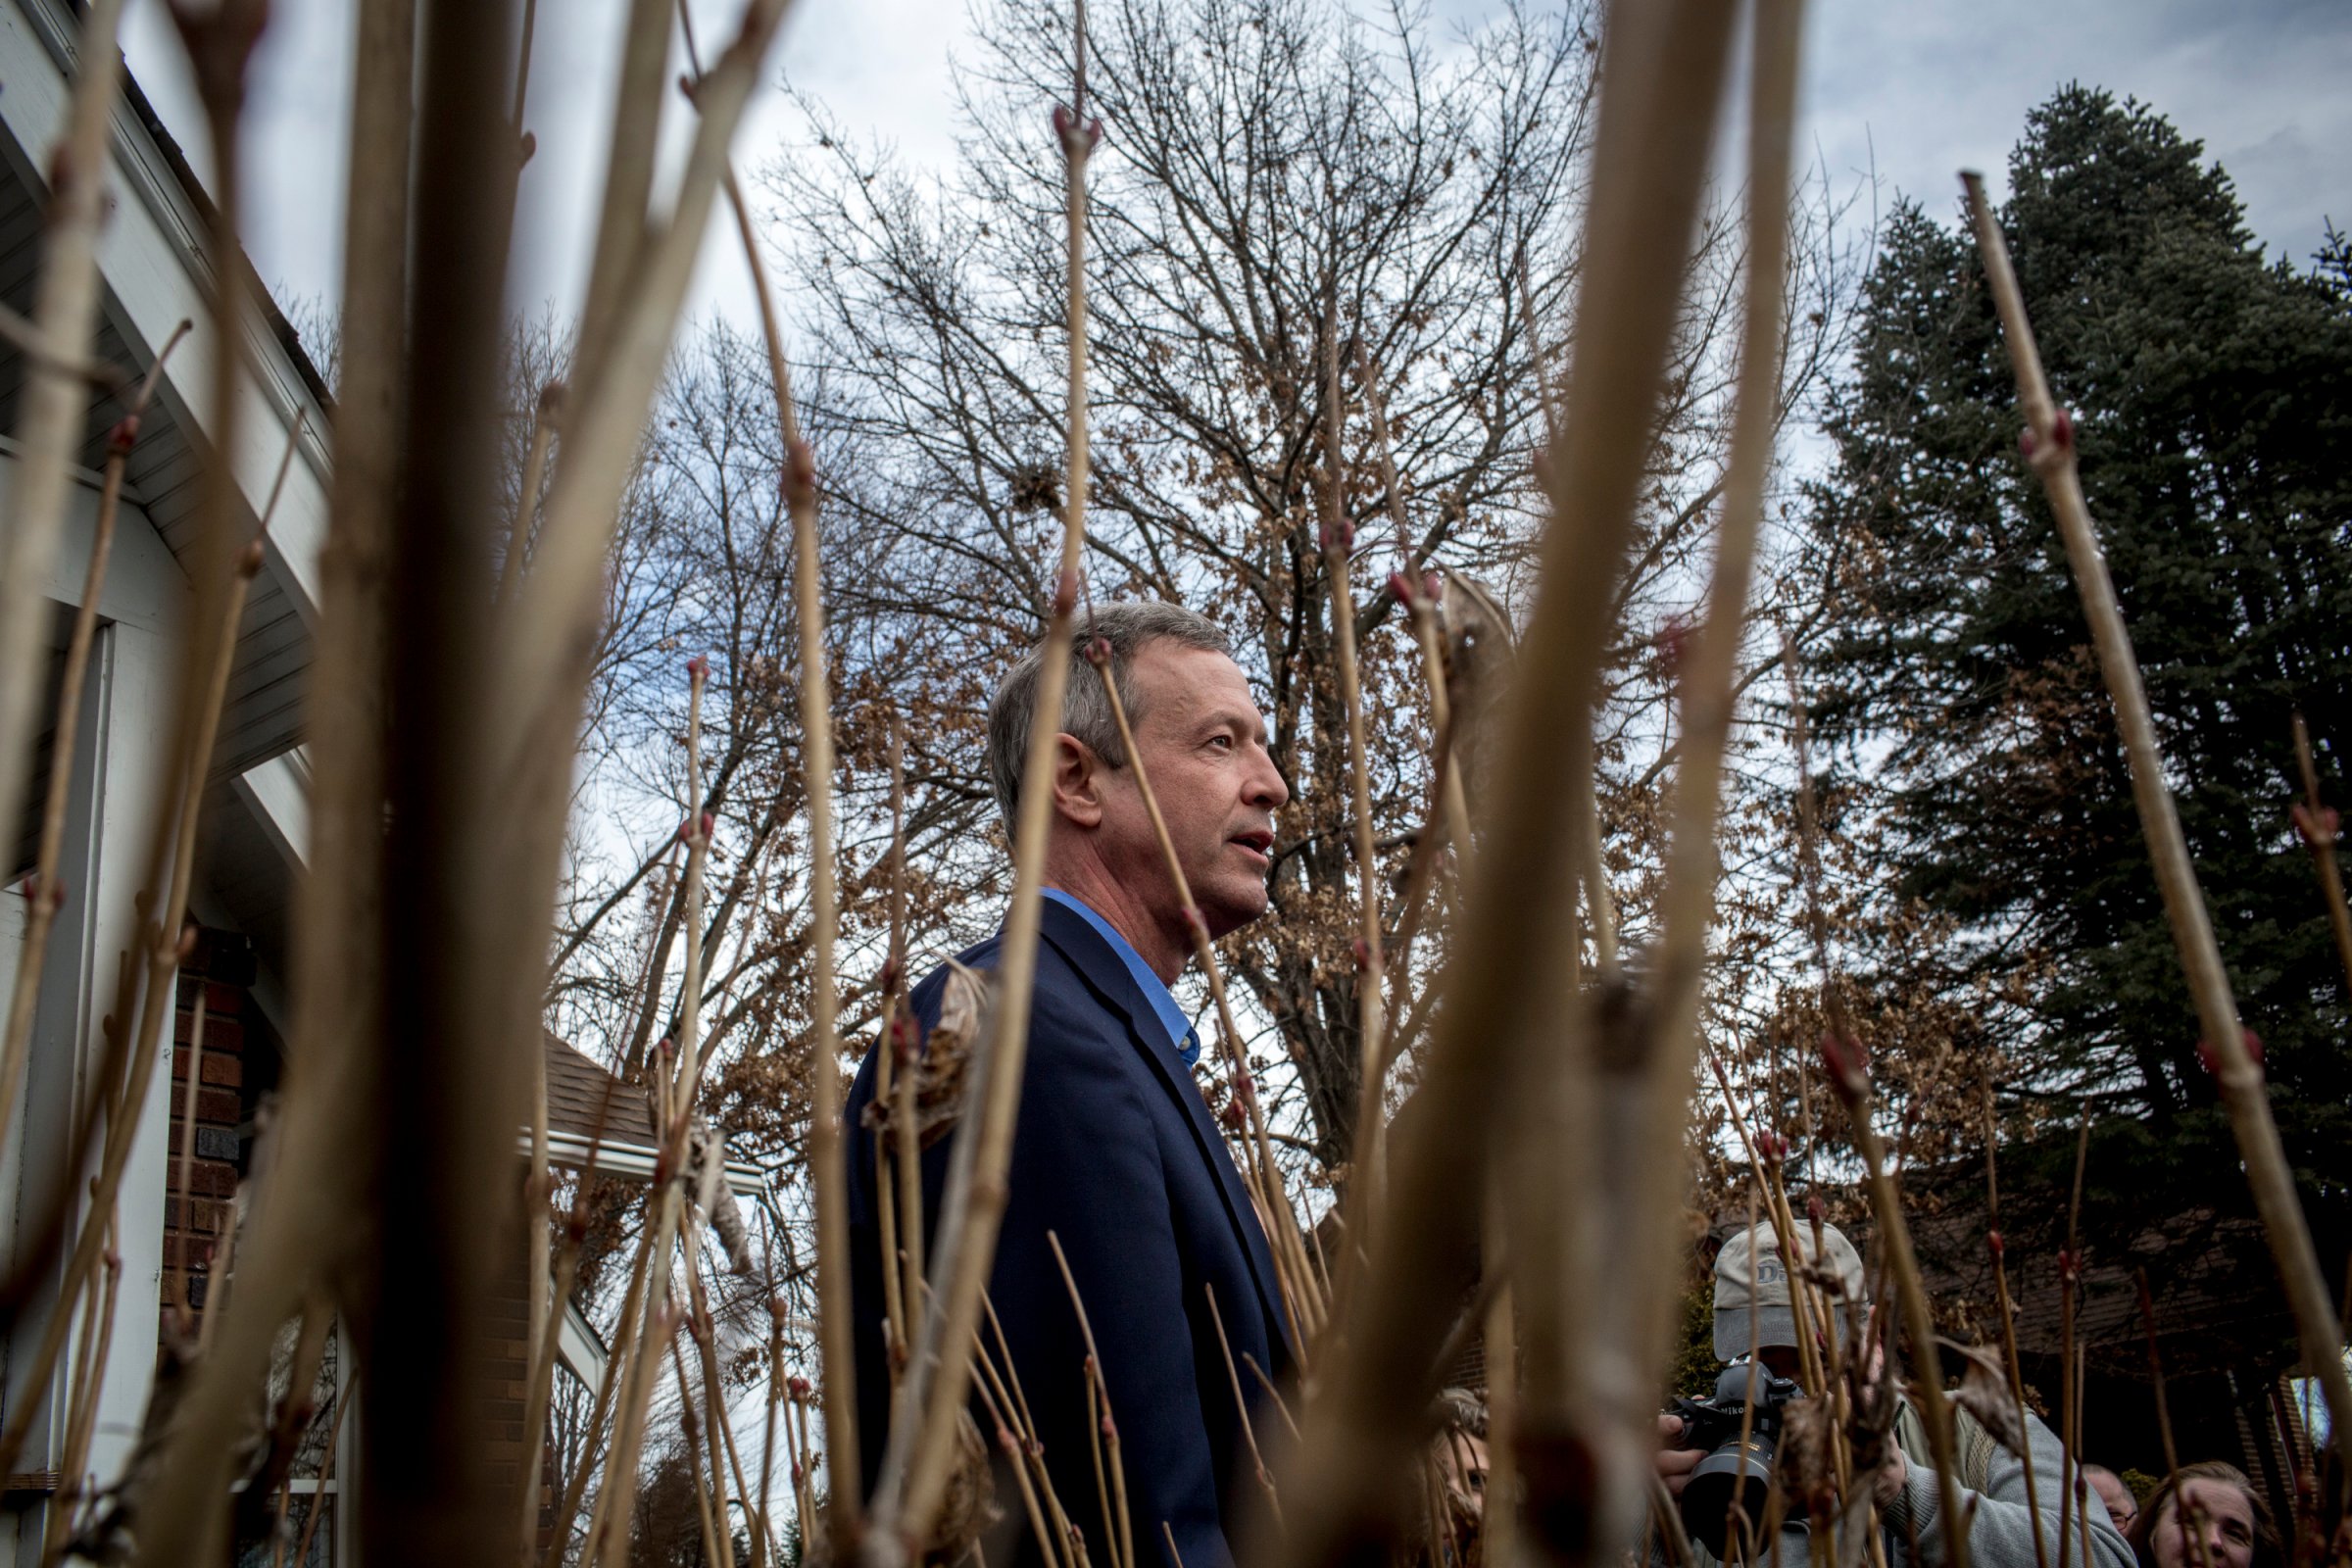 Martin O'Malley held a canvas launch at a supporter's home in Johnston, Iowa on Sunday afternoon,January 31rst. (Natalie Keyssar for TIME)